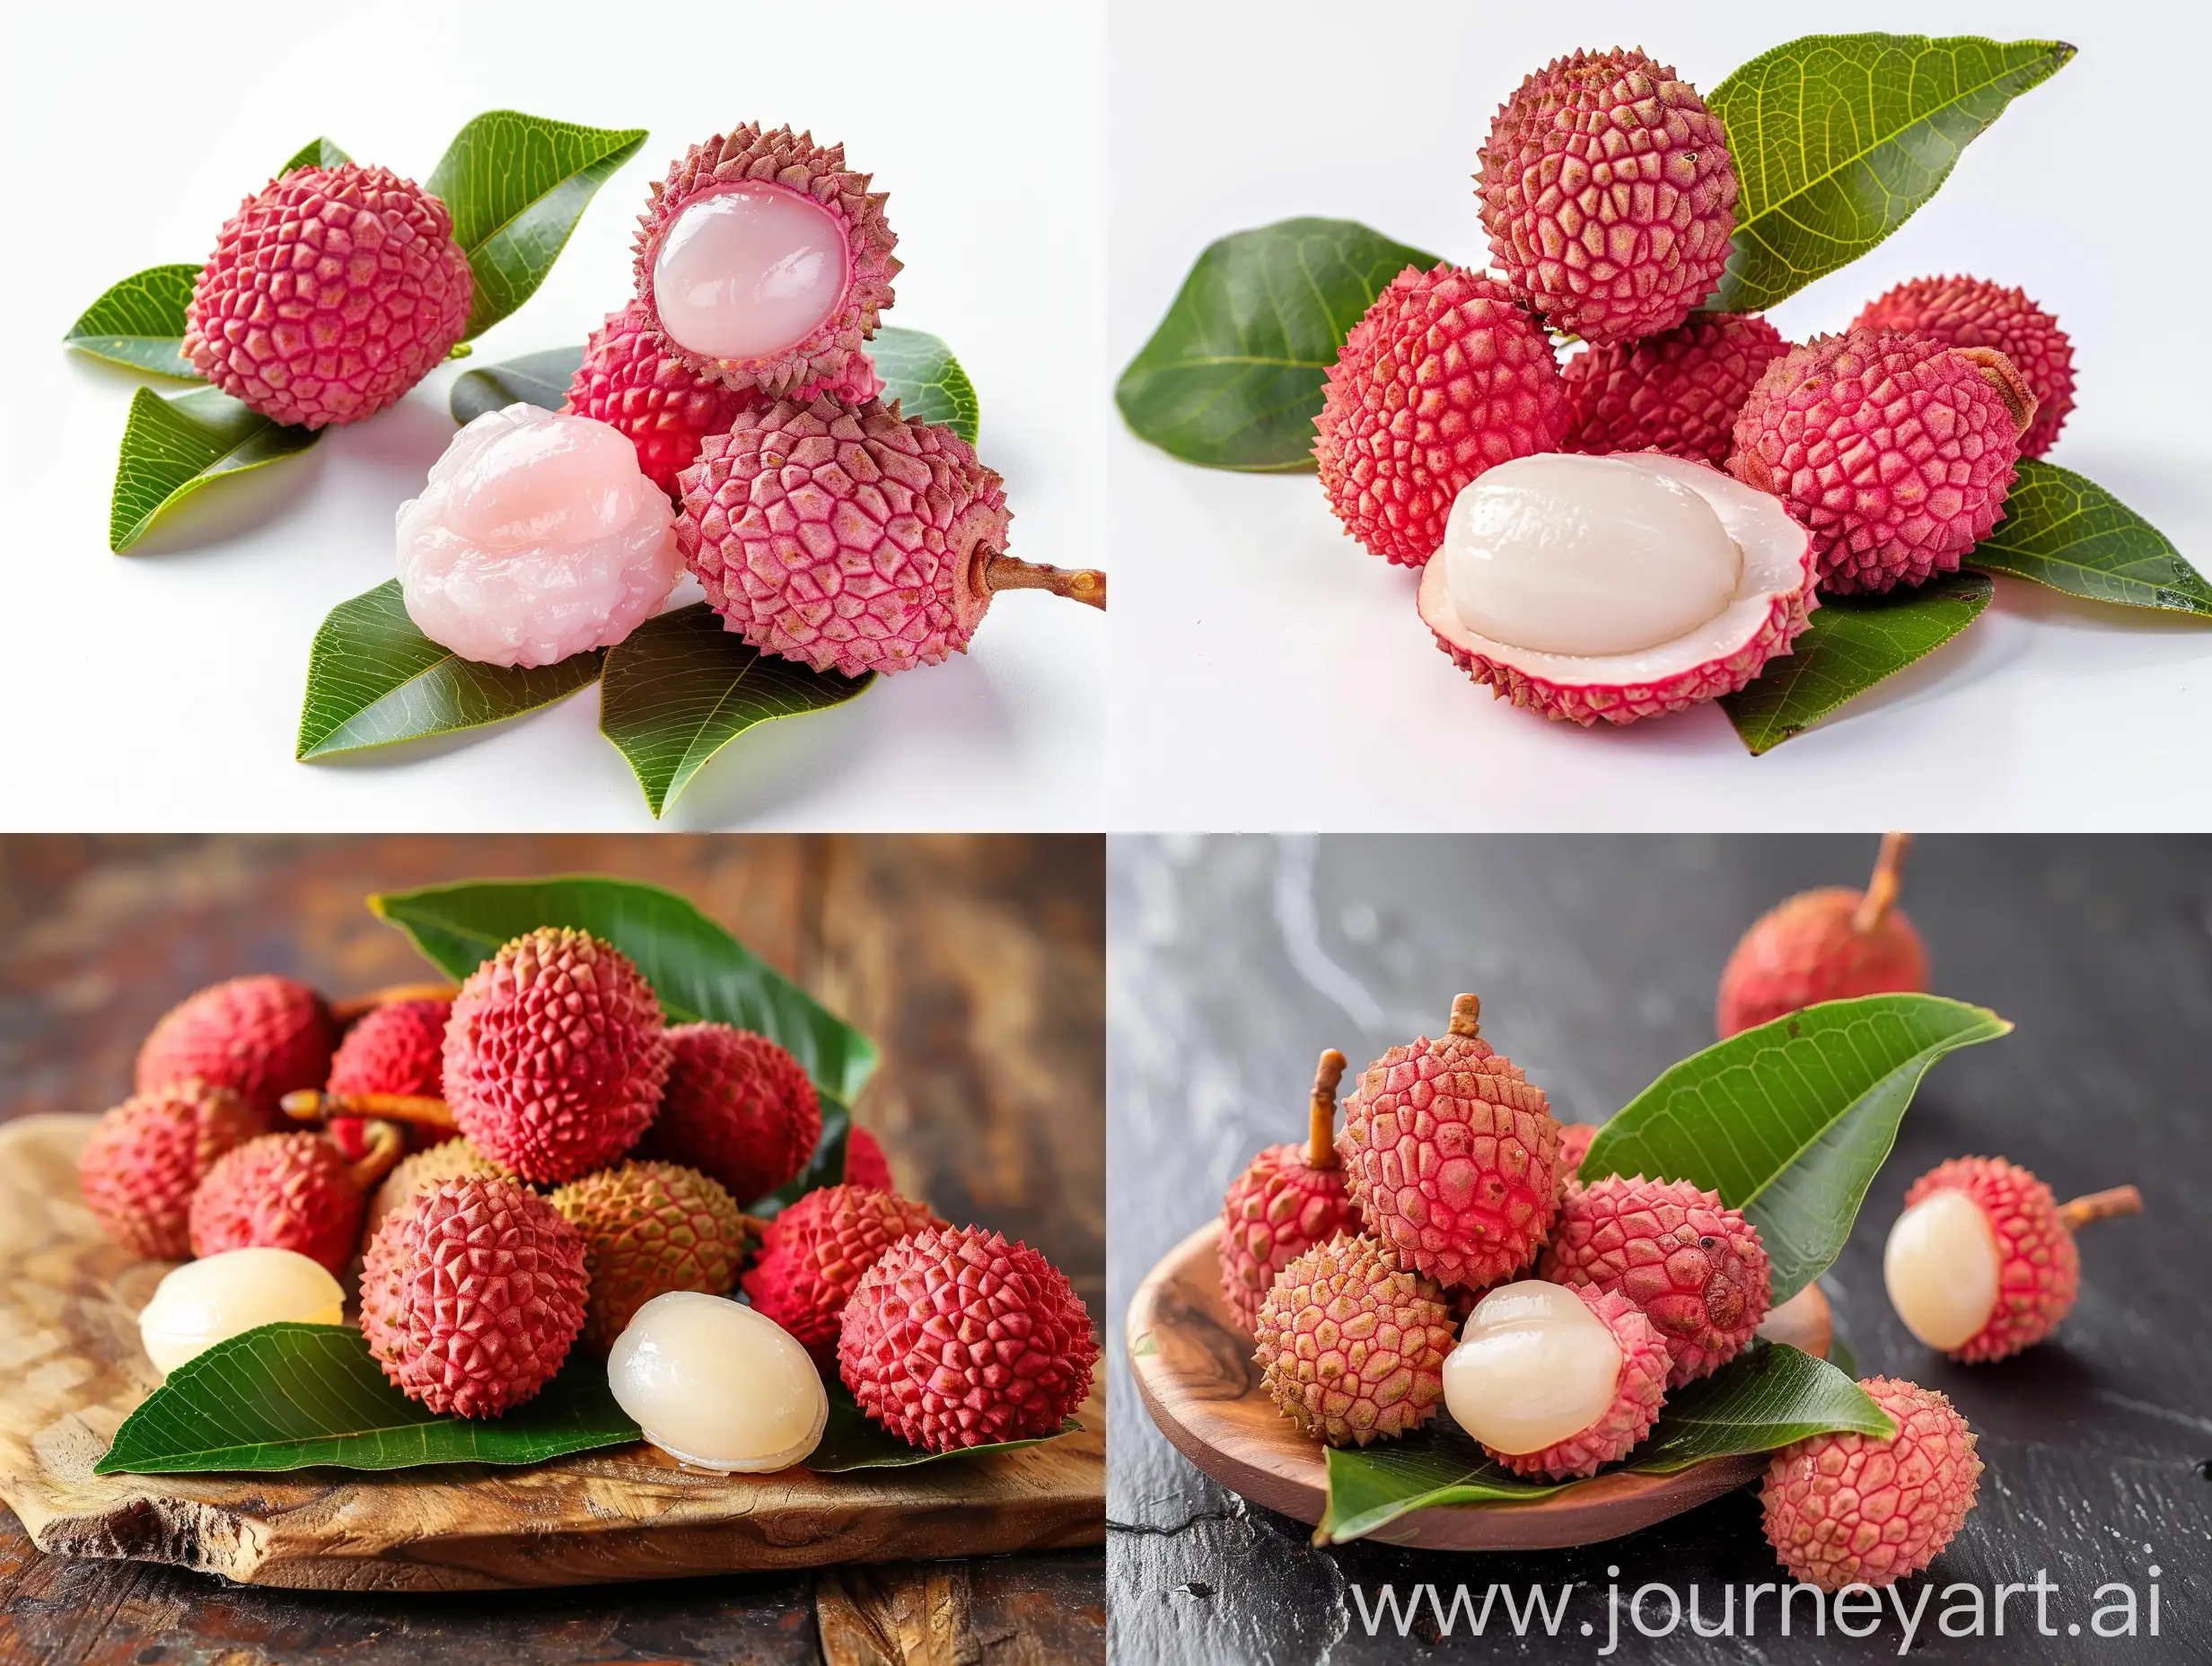 Advertising and attractive photo of lychee fruit